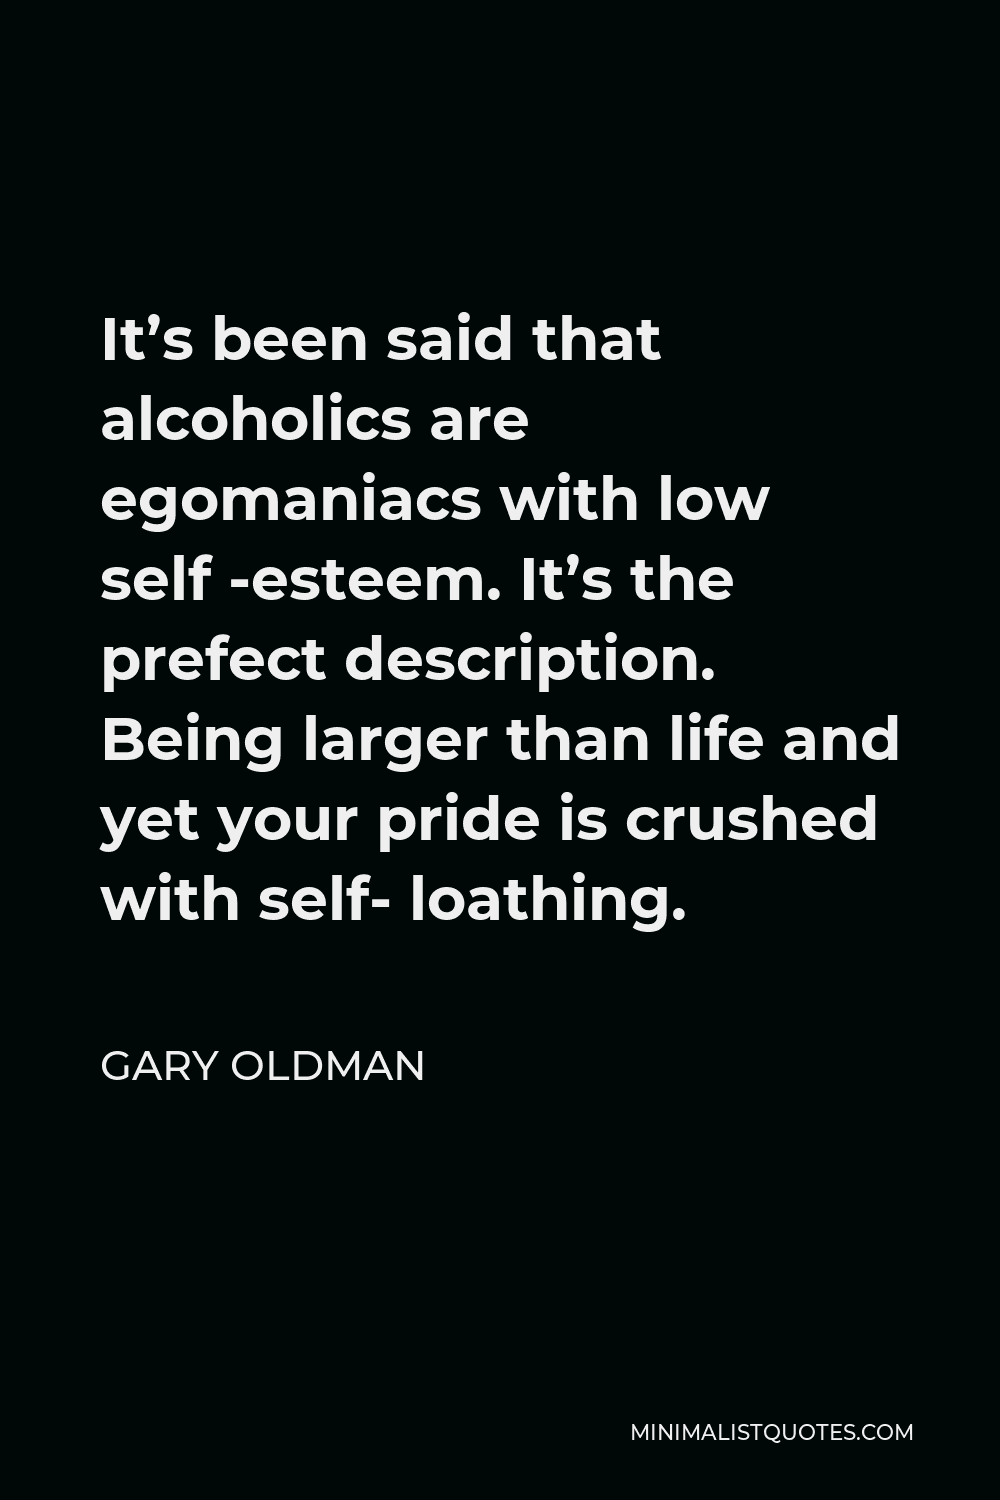 Gary Oldman Quote - It’s been said that alcoholics are egomaniacs with low self -esteem. It’s the prefect description. Being larger than life and yet your pride is crushed with self- loathing.